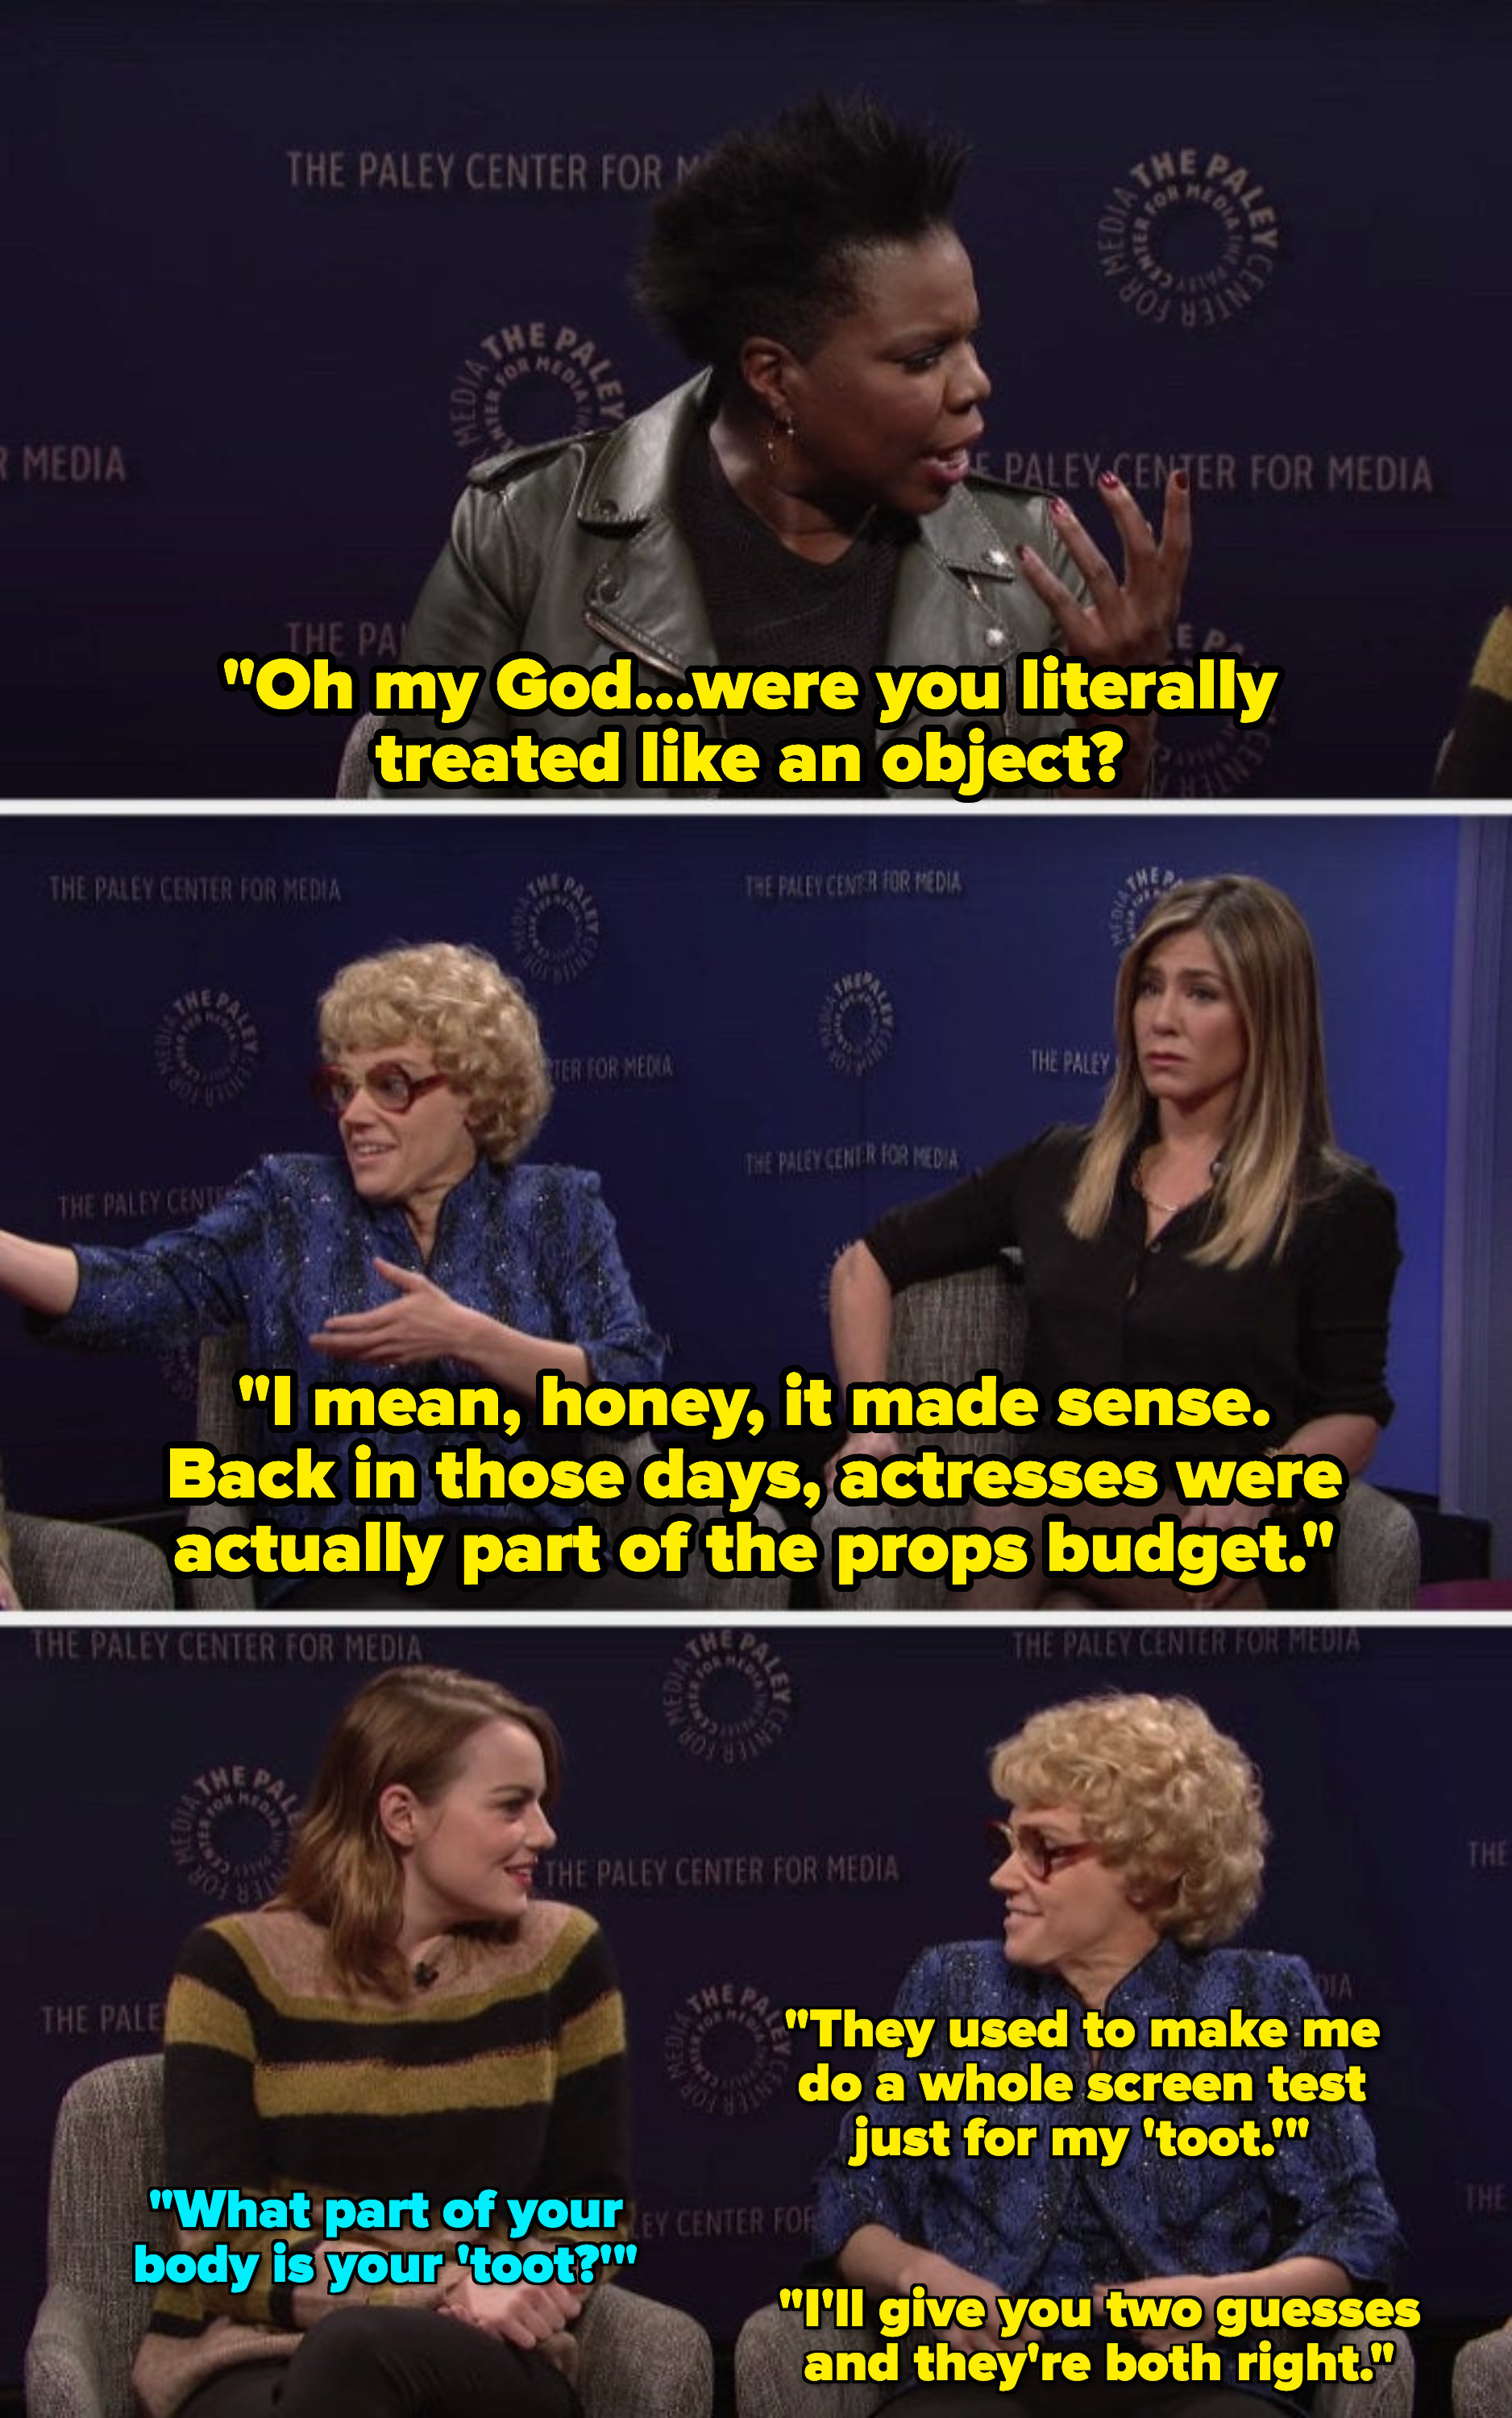 Kate saying female actors used to be thought of as objects so much that they were part of the props budget